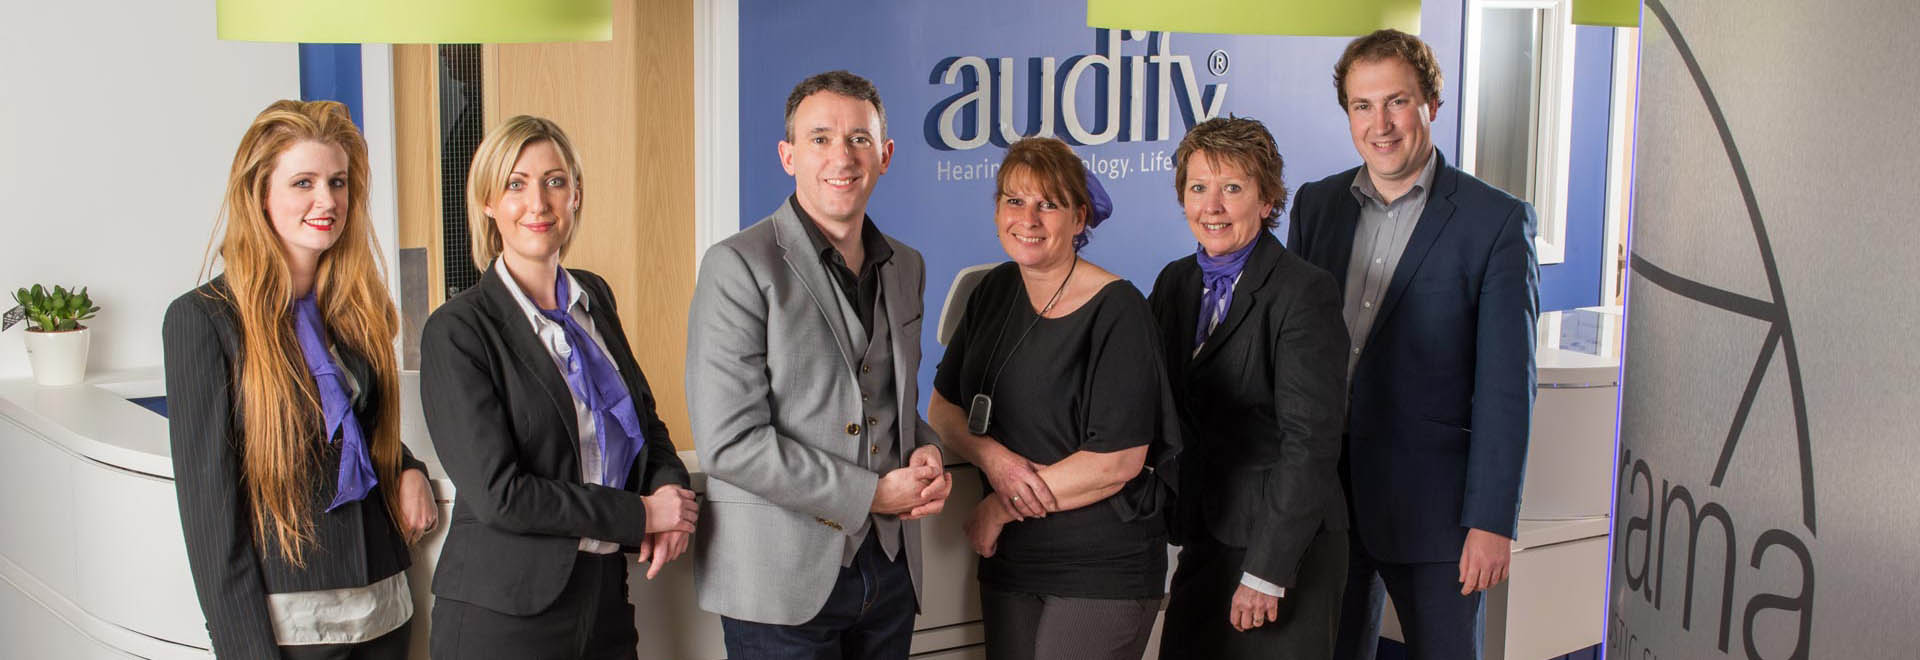 Meet the team at Audify®|Exeter